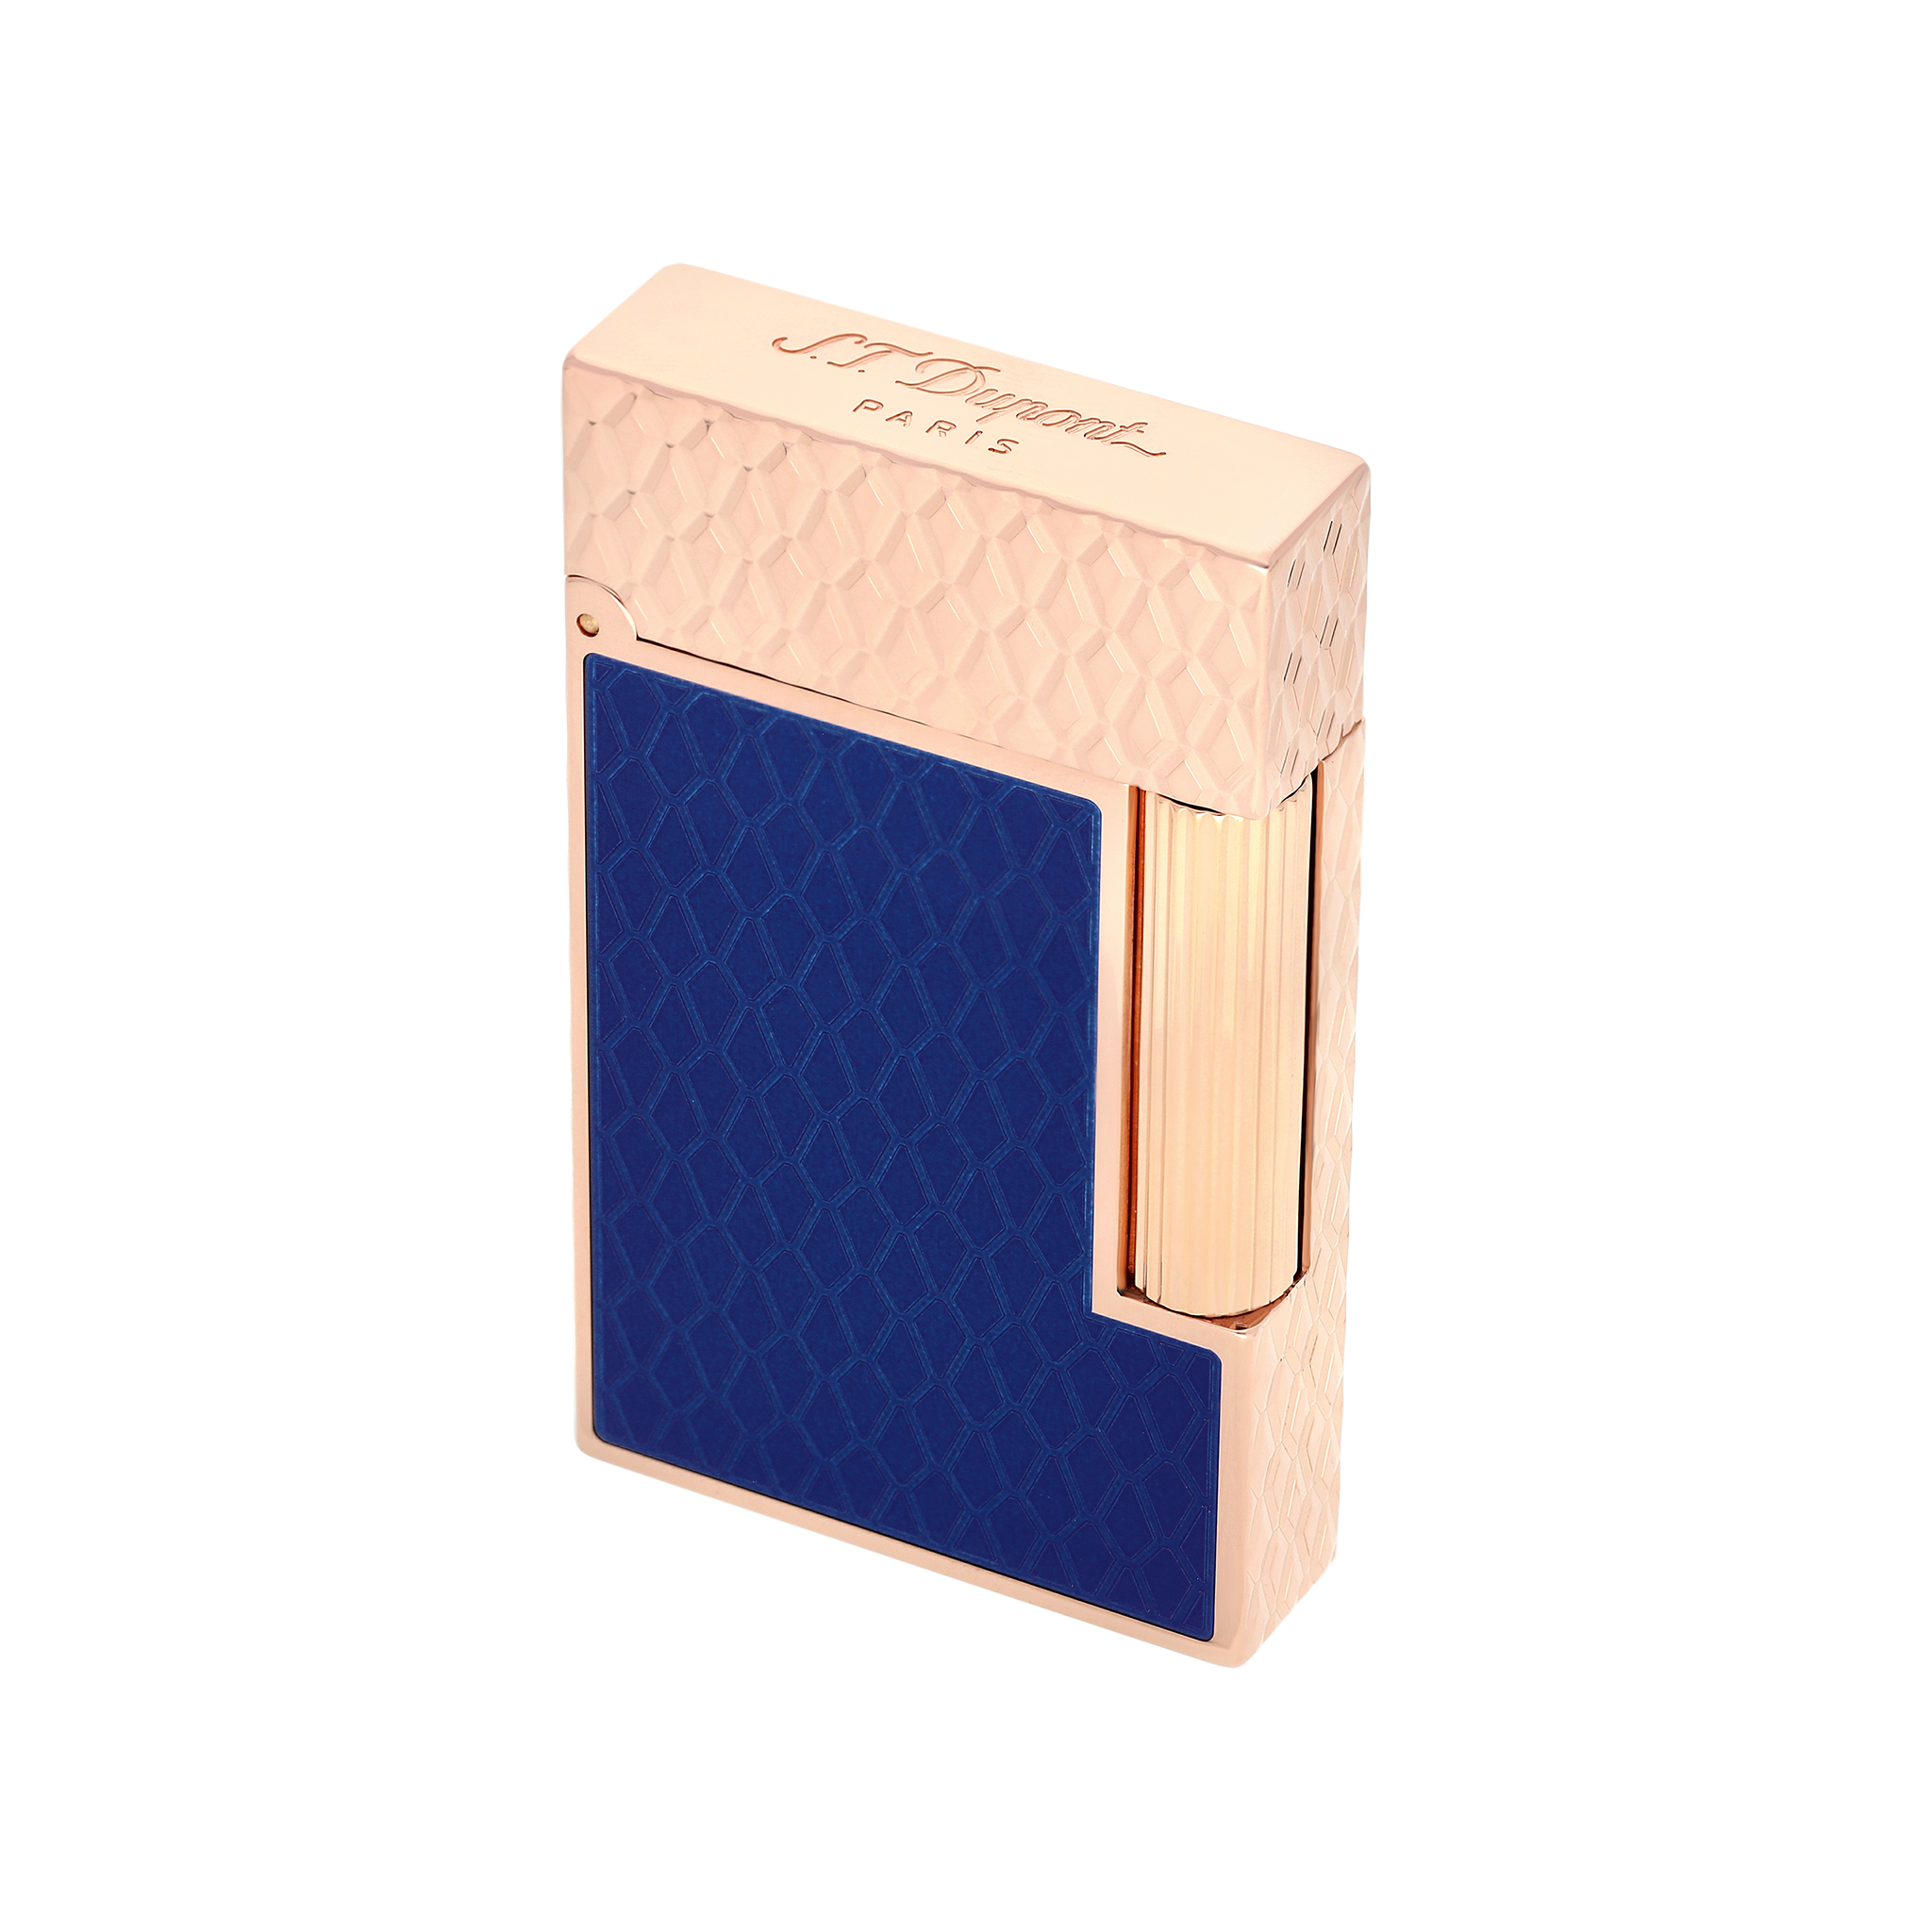 Ligne line luxury blue/ under lacquer lacquer/ S.T. 2 | - – gold lighters Guilloche Bright DUPONT pink